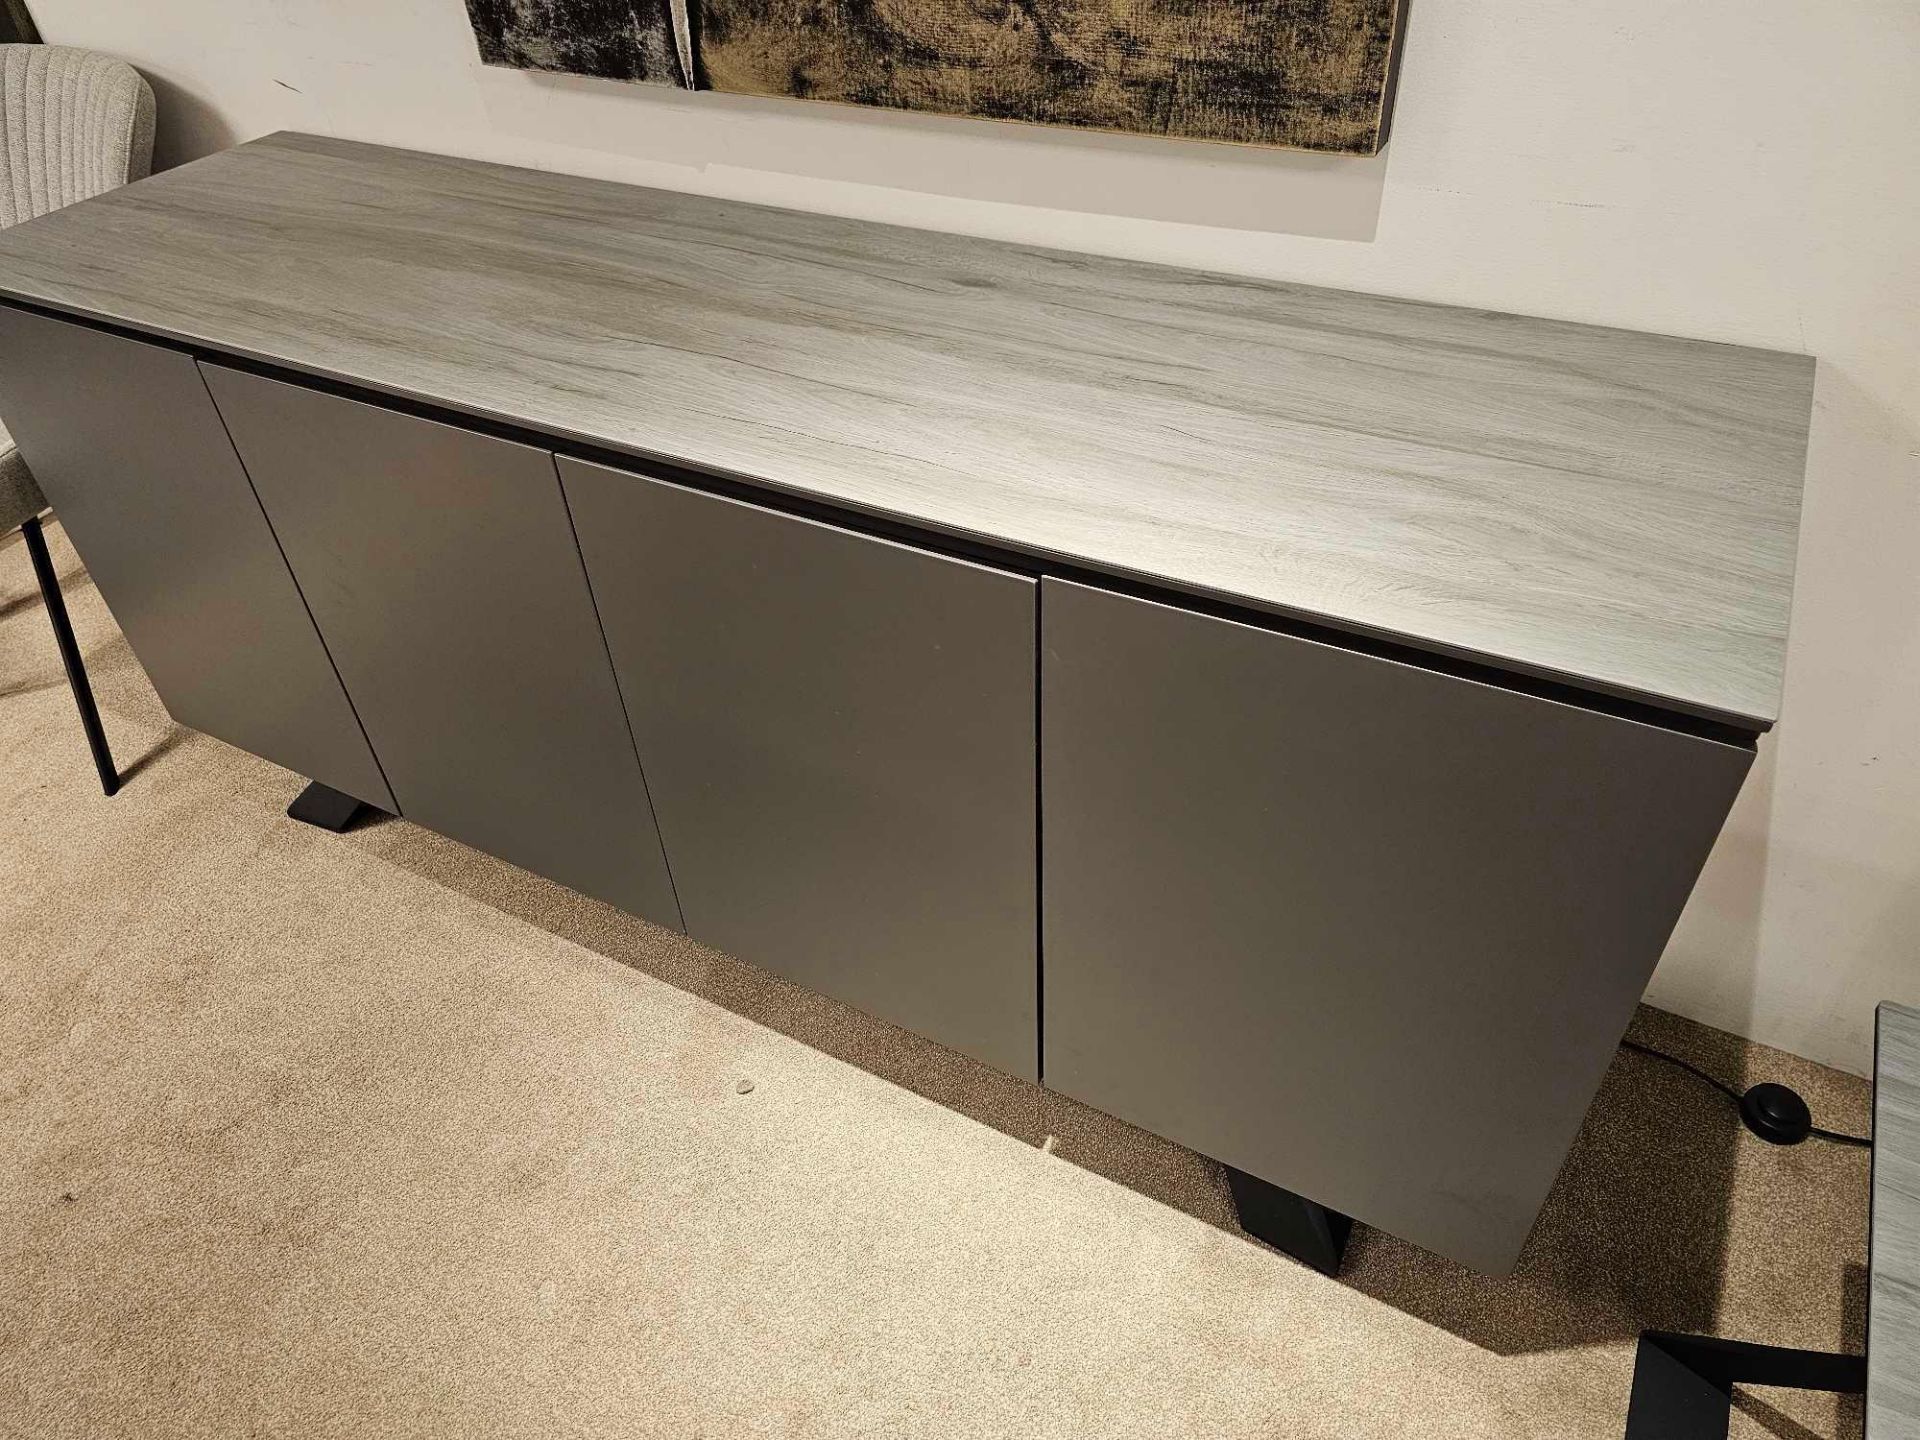 Spartan Sideboard by Kesterport The Spartan Four Door Sideboard provides is striking as a stand - Image 4 of 8